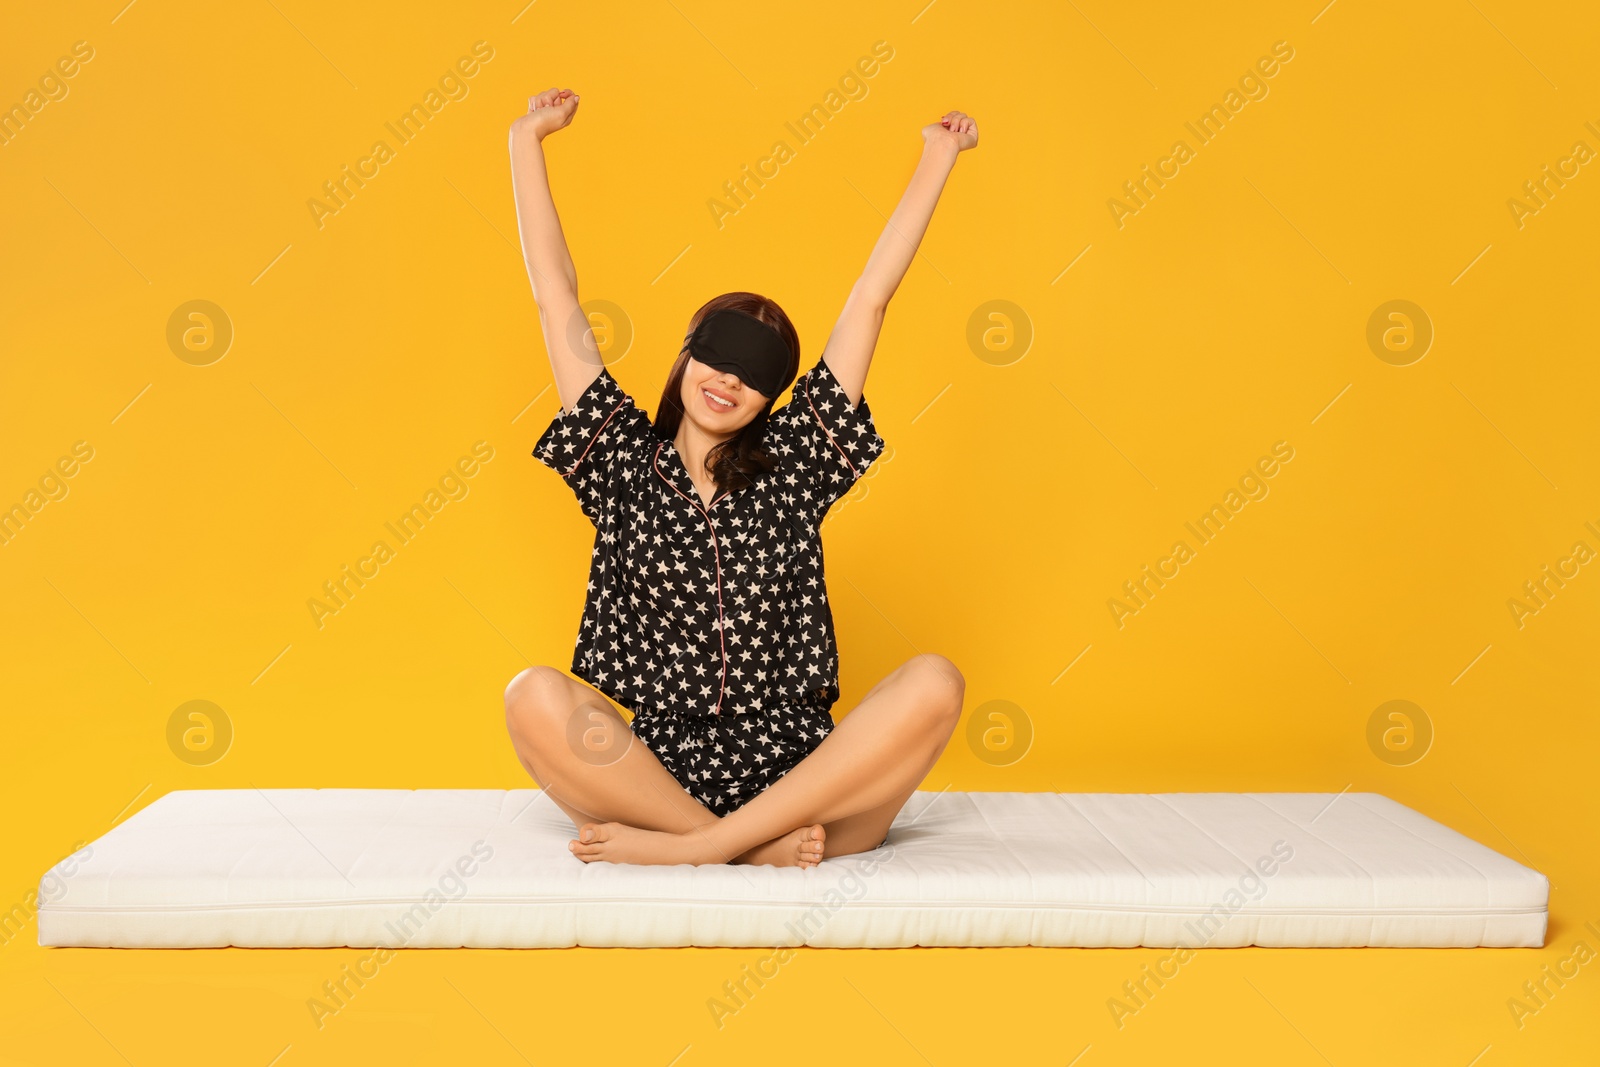 Photo of Woman in sleep mask stretching on soft mattress against orange background